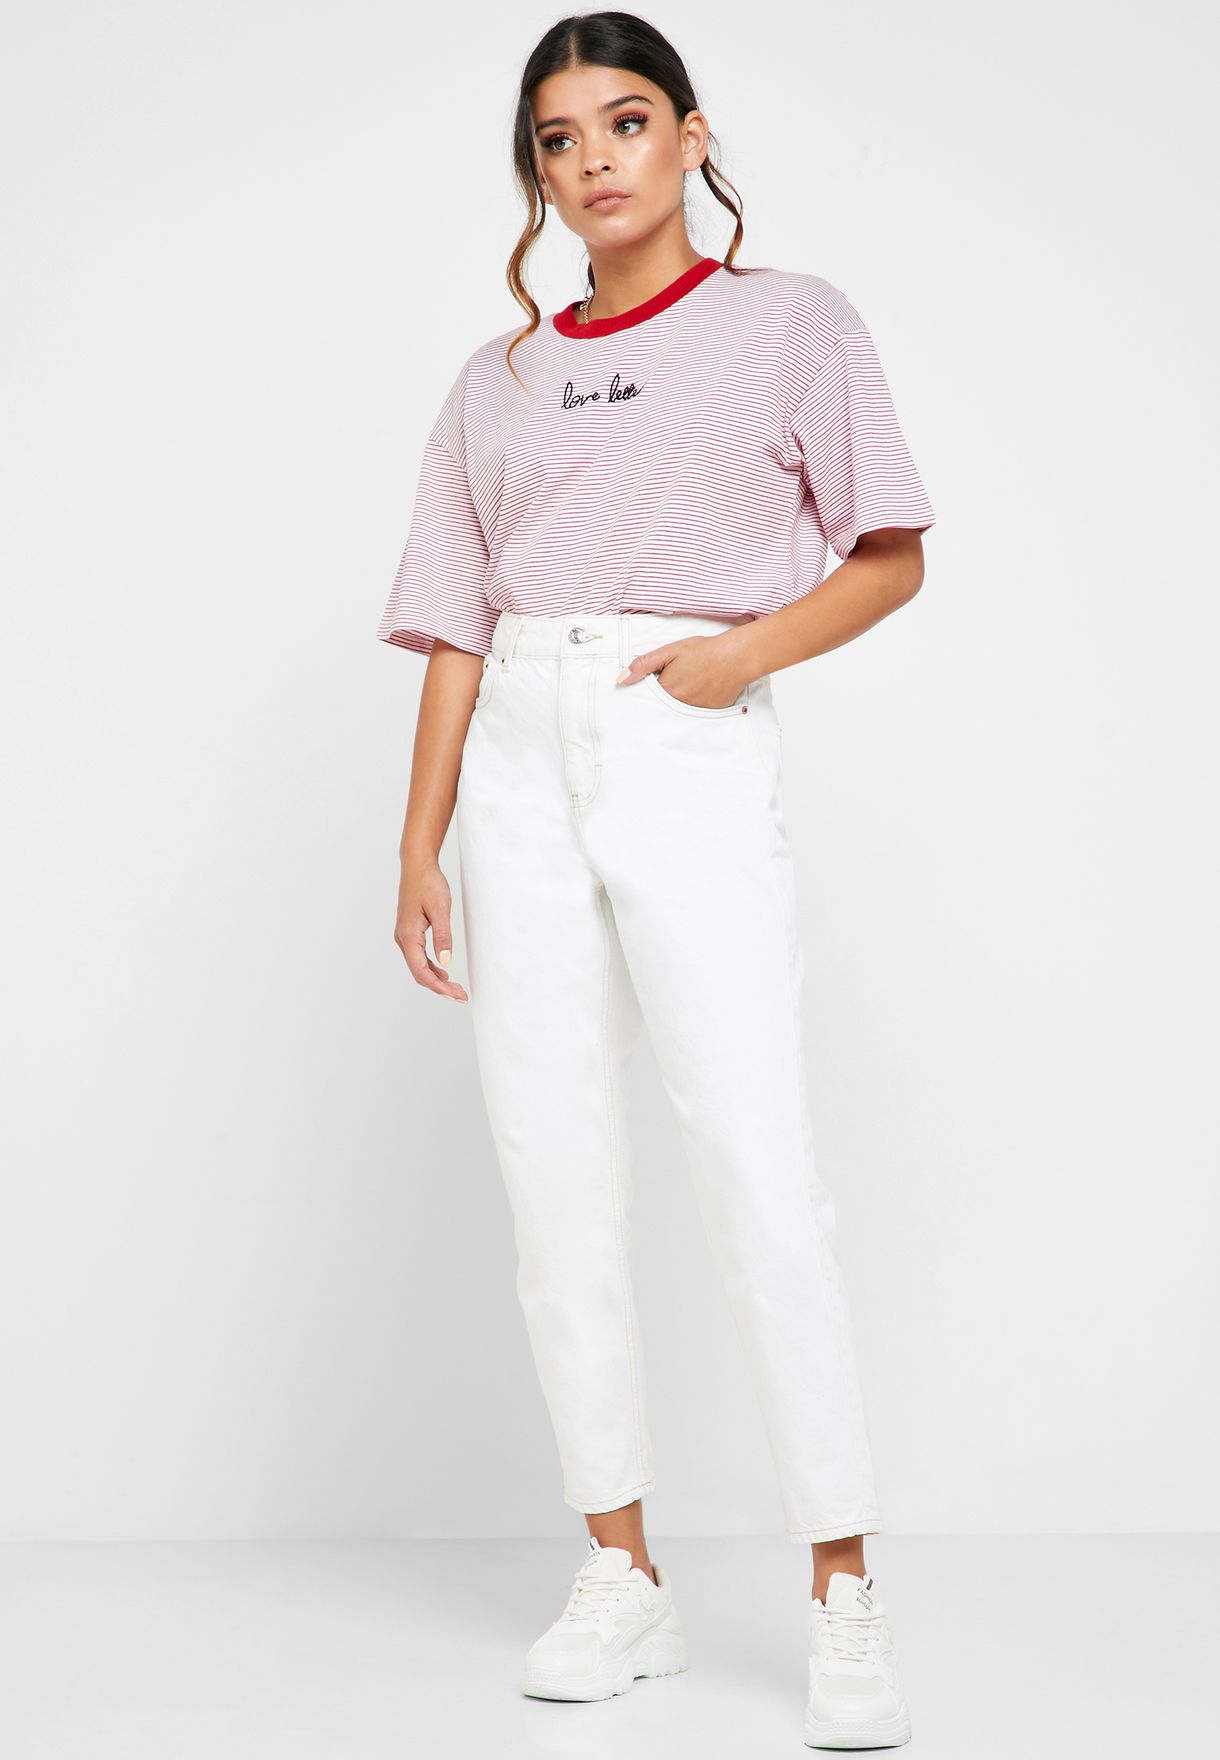 topshop mom jeans white